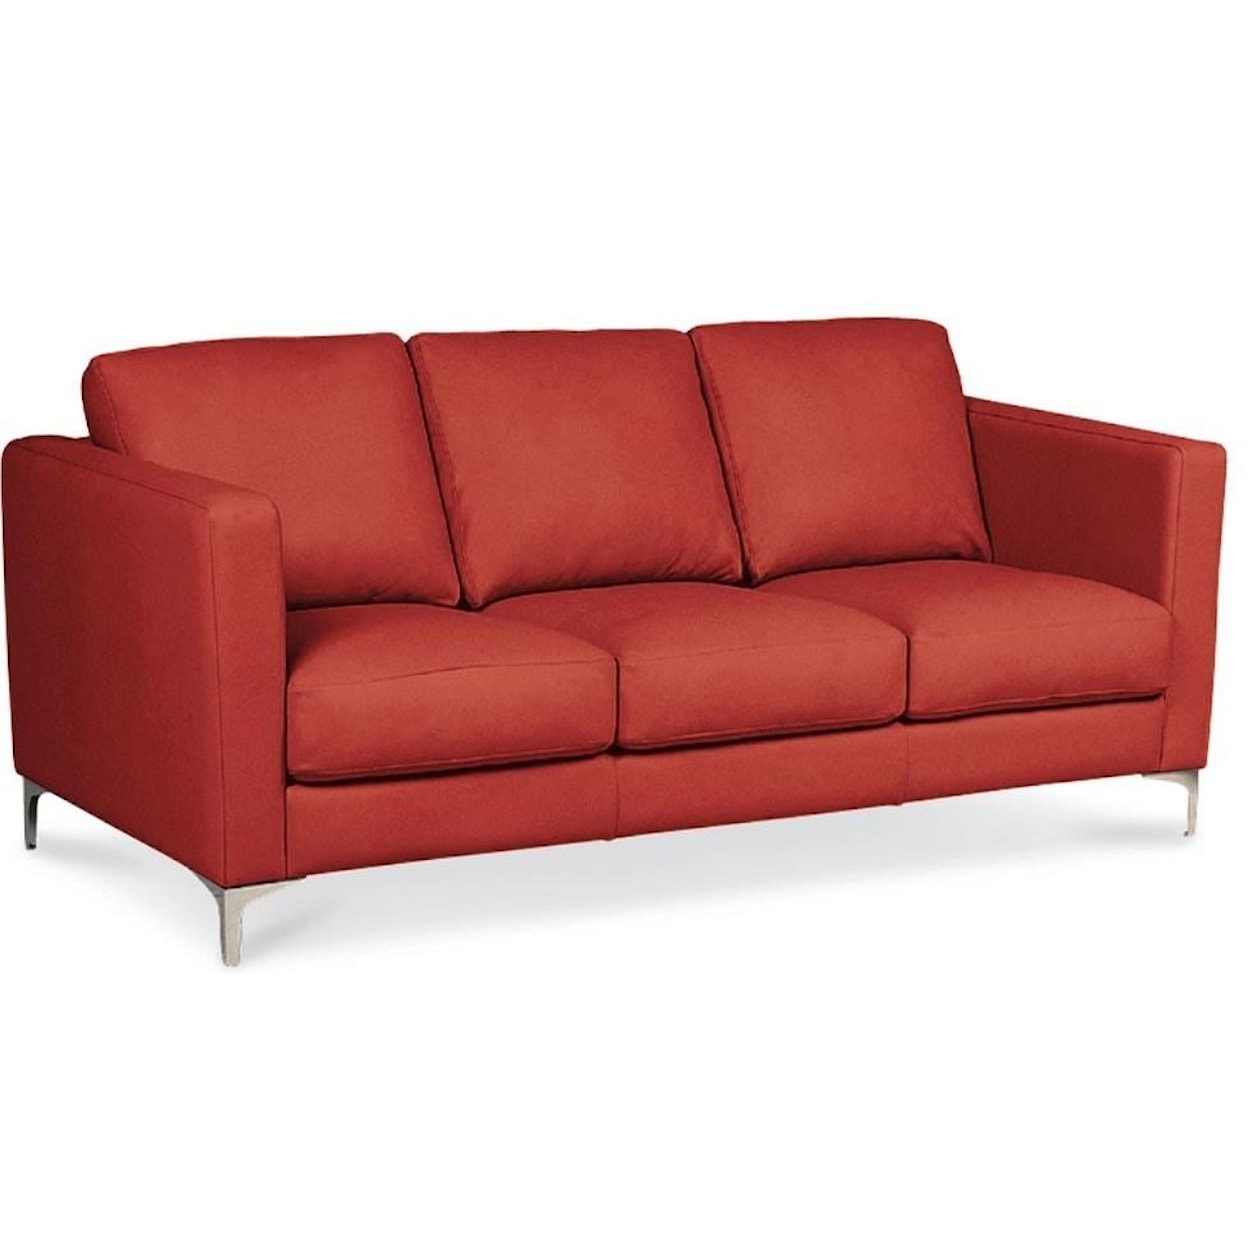 American Leather Kendall 3-Seat Sofa